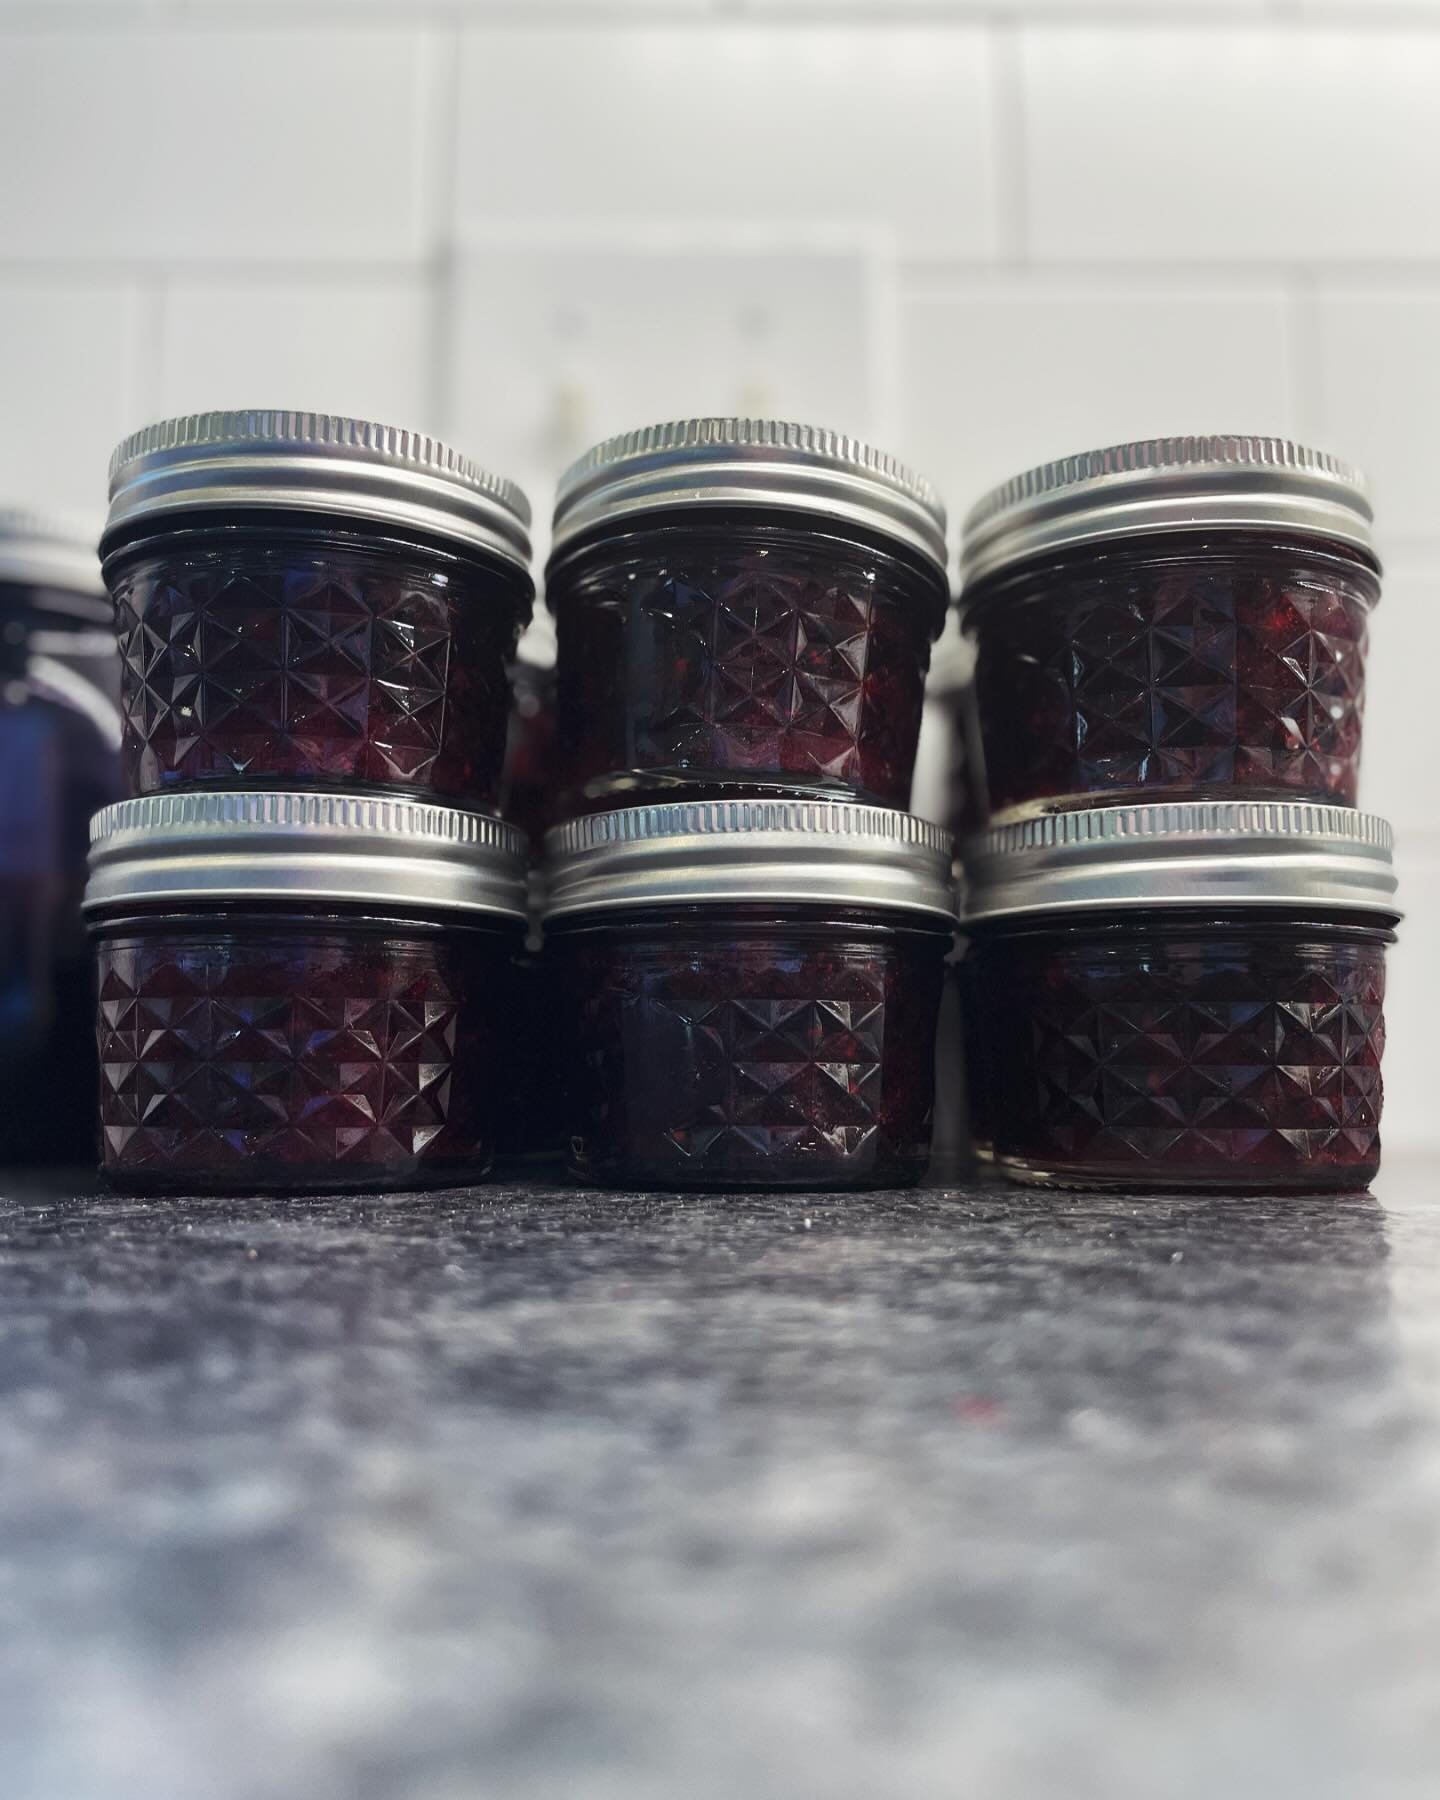 The fruits of our labor. Literally. When I was little, my grandmother always made strawberry freezer jam. As an adult, I&rsquo;ve carried on the tradition. But, a couple of years ago, after a disaster trying to make blackberry jam, I realized, I need